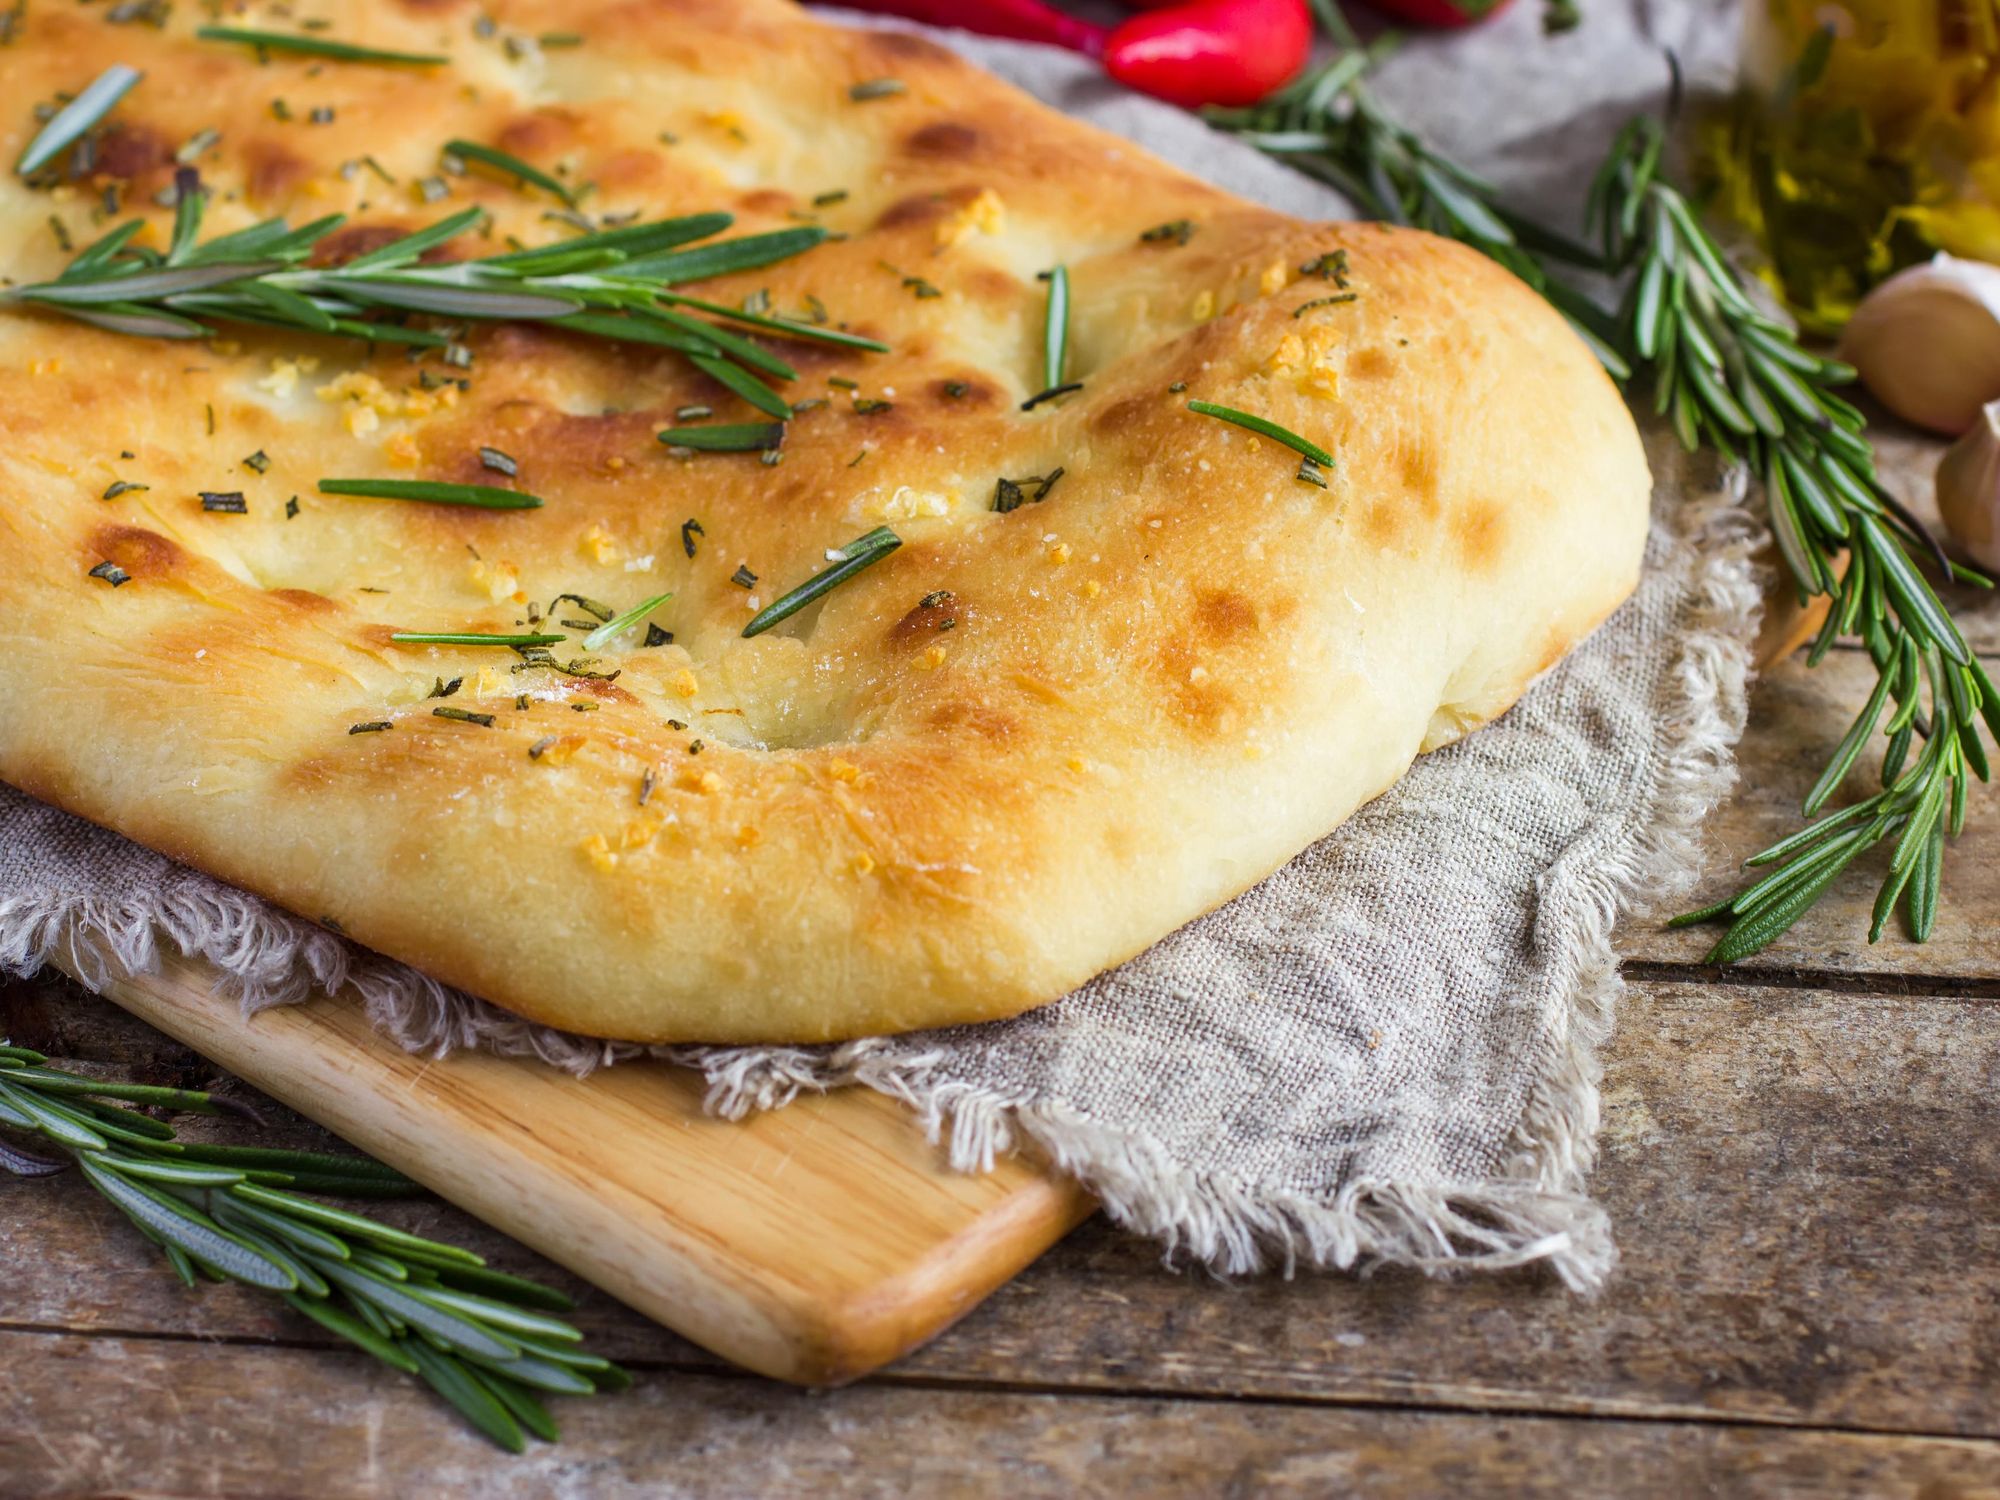 Focaccia with Rosemary or Tomatoes